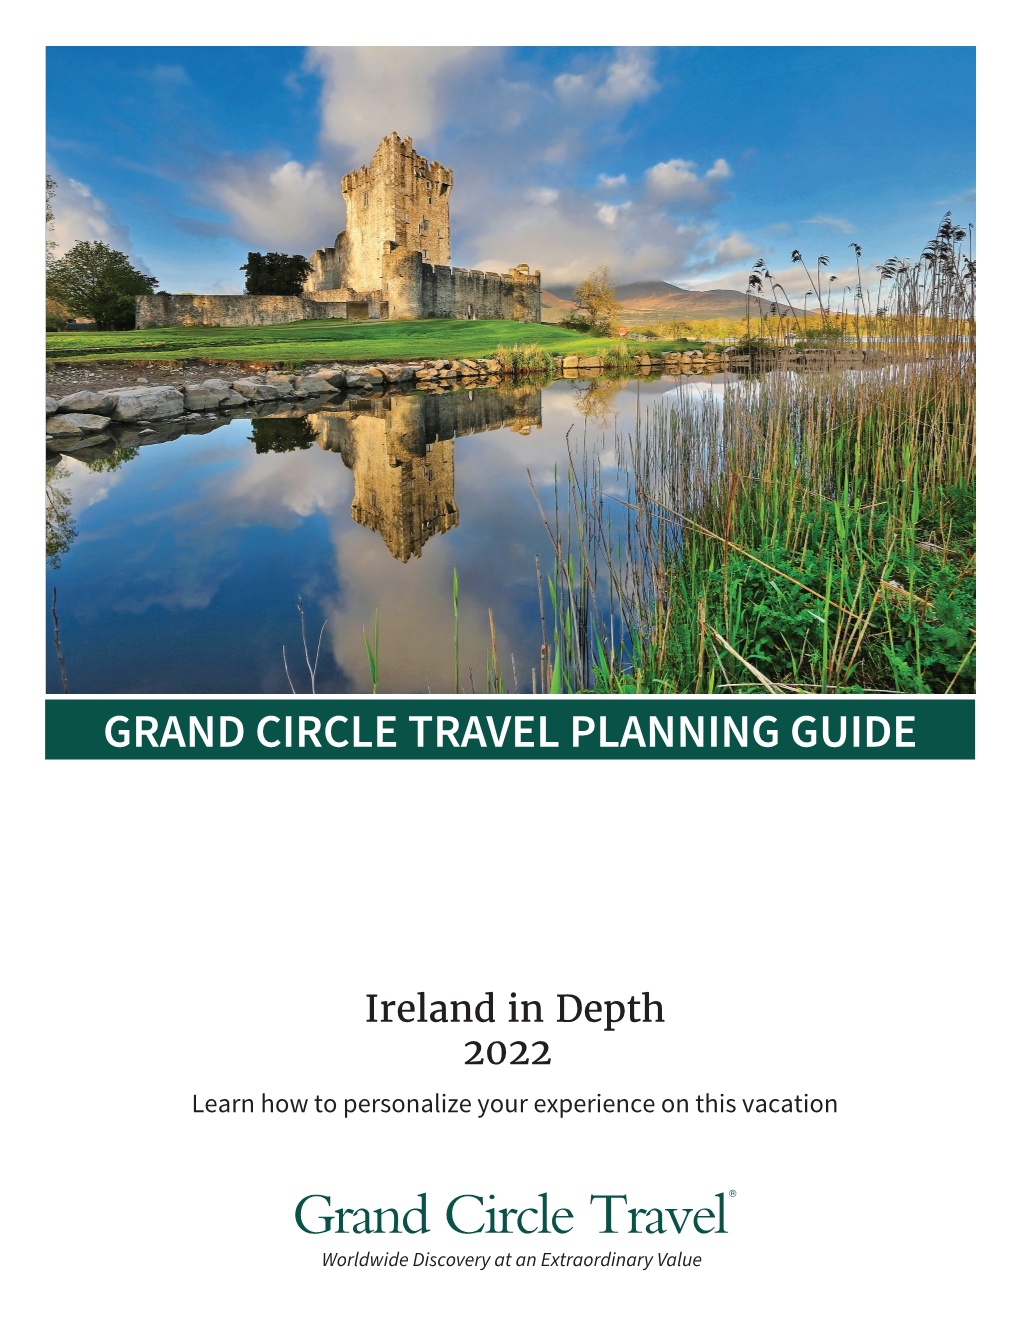 Ireland in Depth 2022 Learn How to Personalize Your Experience on This Vacation